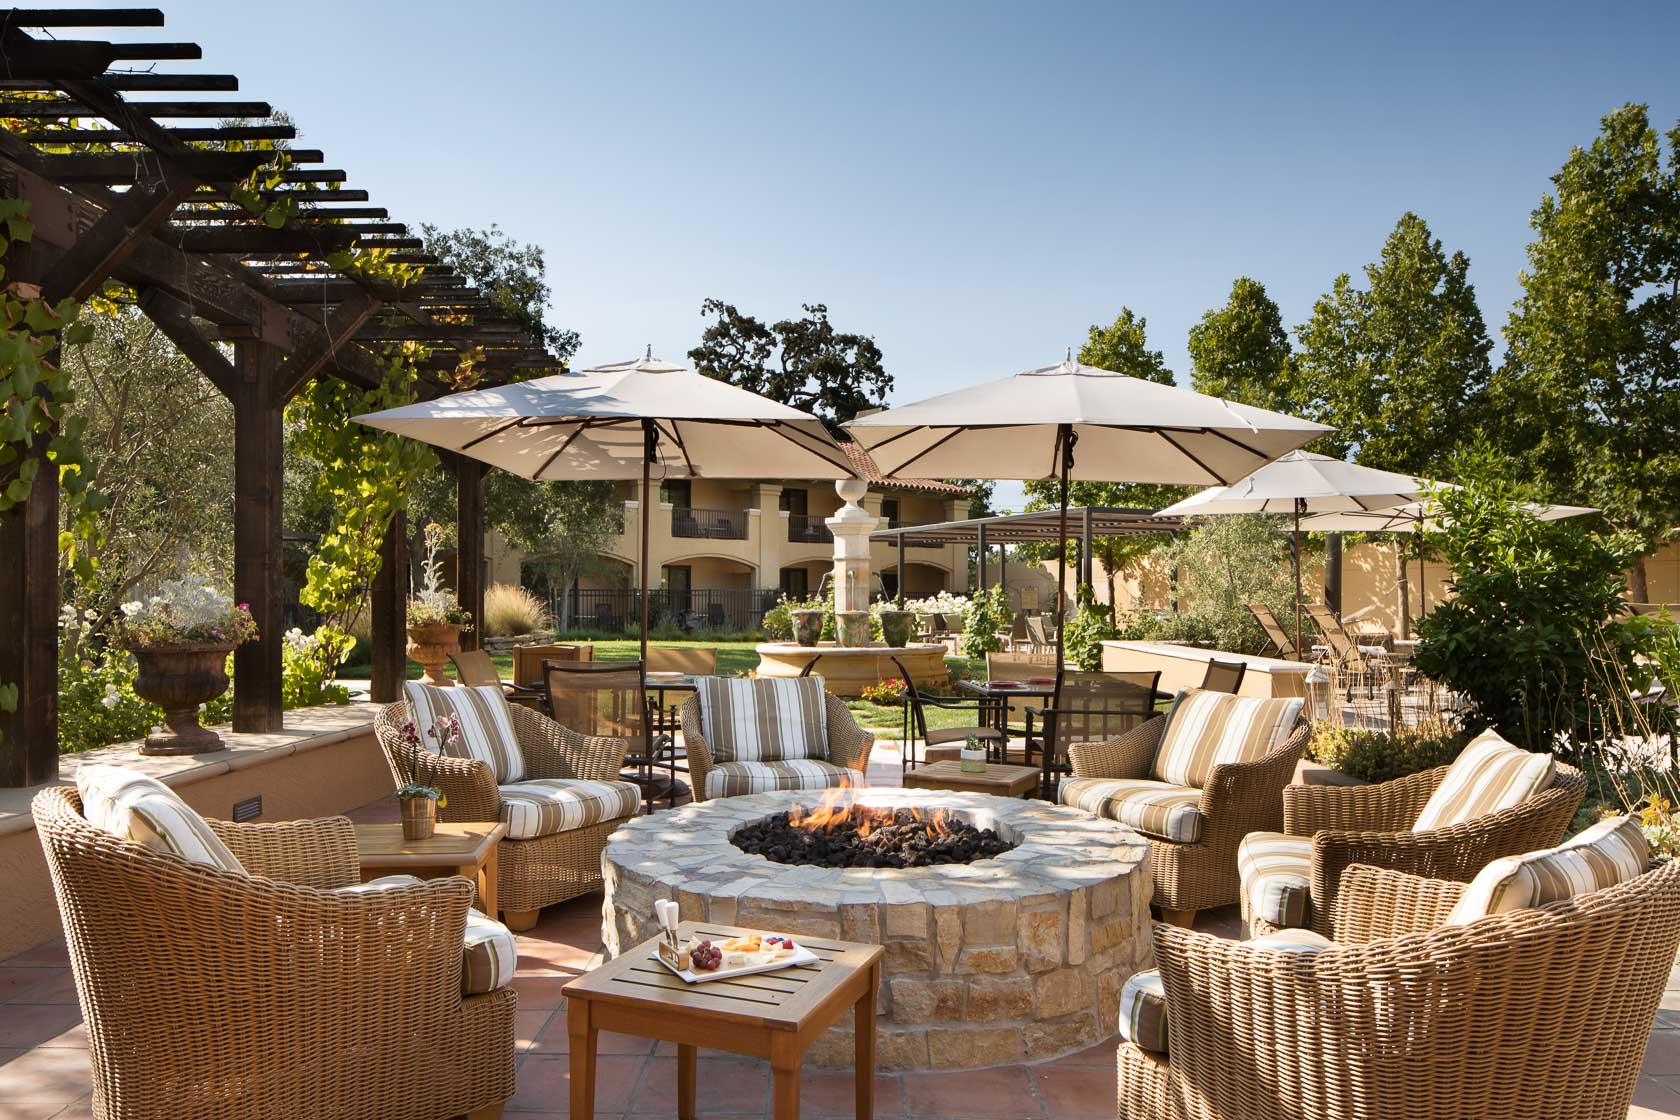 A place where you can gather by the courtyard fire pits